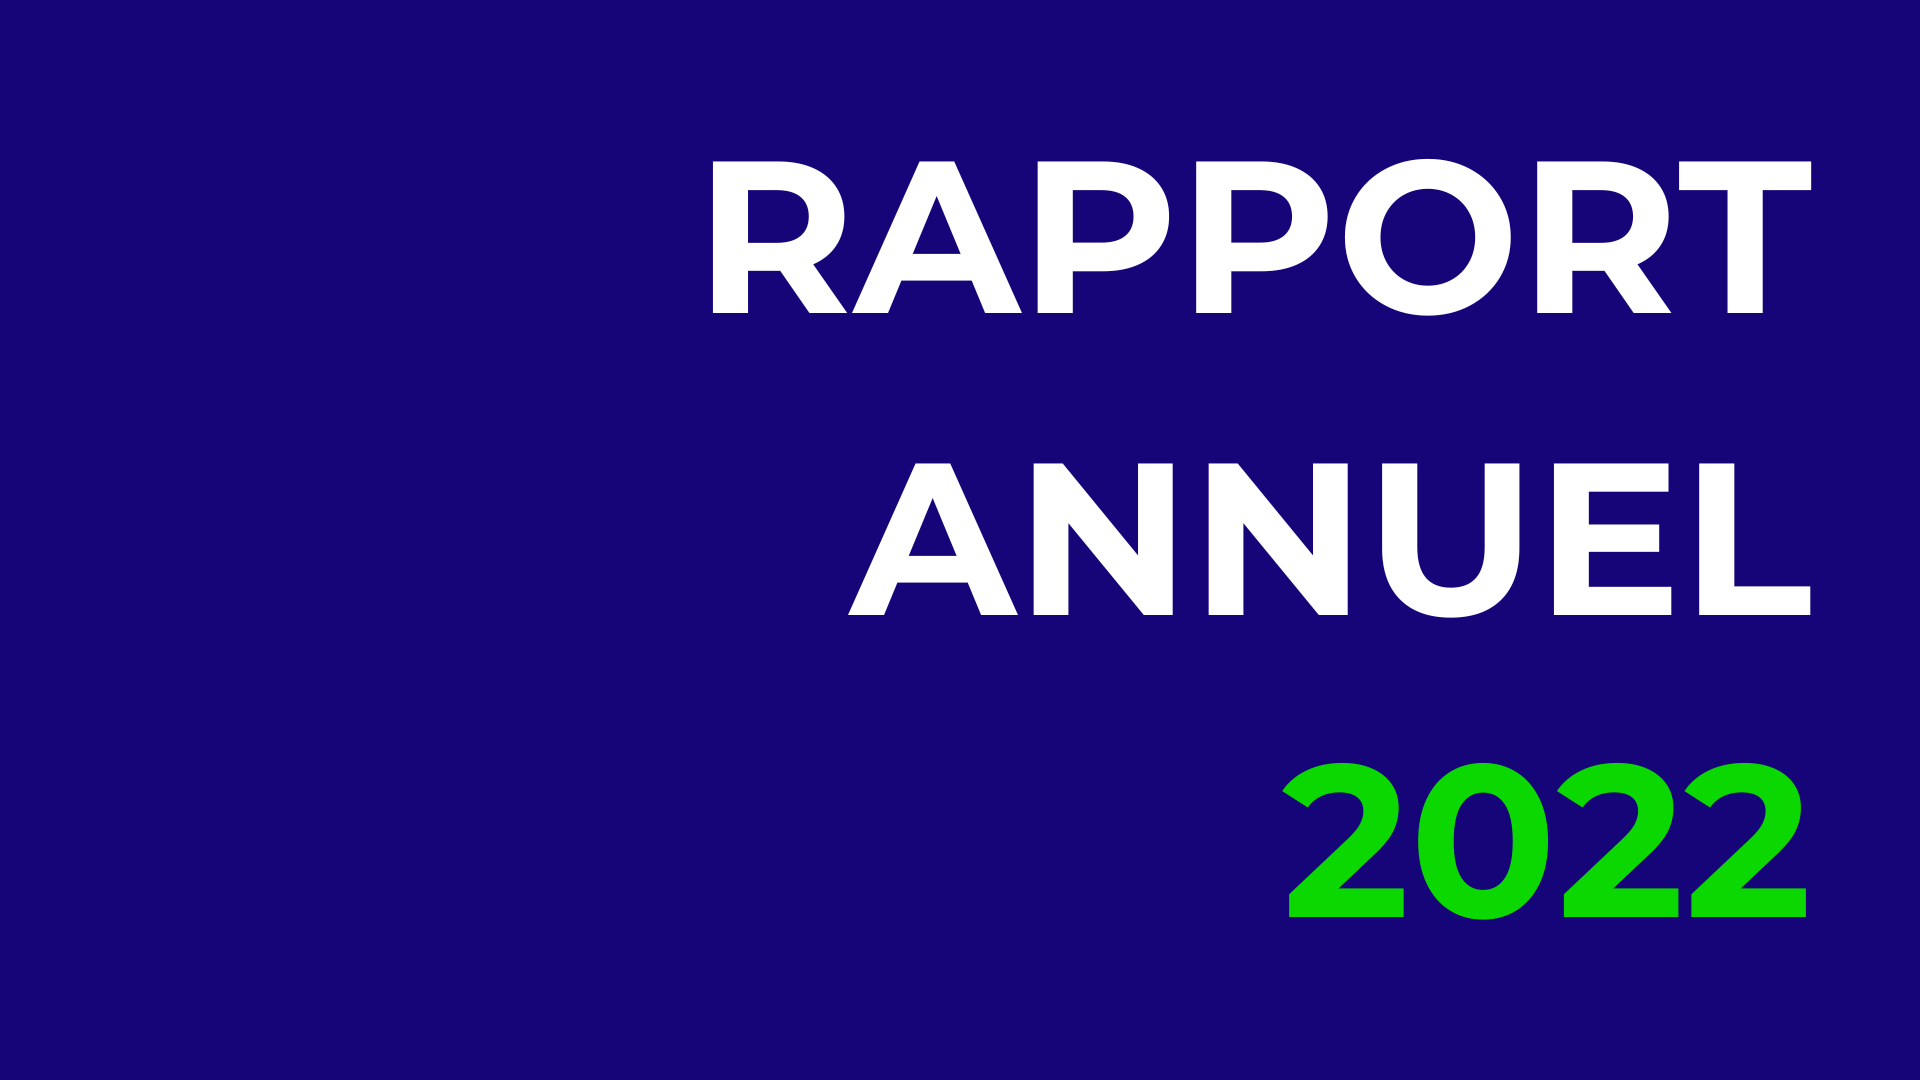 You are currently viewing Rapport annuel 2022 du SIAO‎ 67 ‎ ‎ ‎ ‎ ‎ ‎ ‎ ‎ ‎ ‎ ‎ ‎ ‎ ‎ ‎ ‎ ‎ ‎ ‎ ‎ ‎ ‎ ‎ ‎ ‎ ‎ ‎ ‎